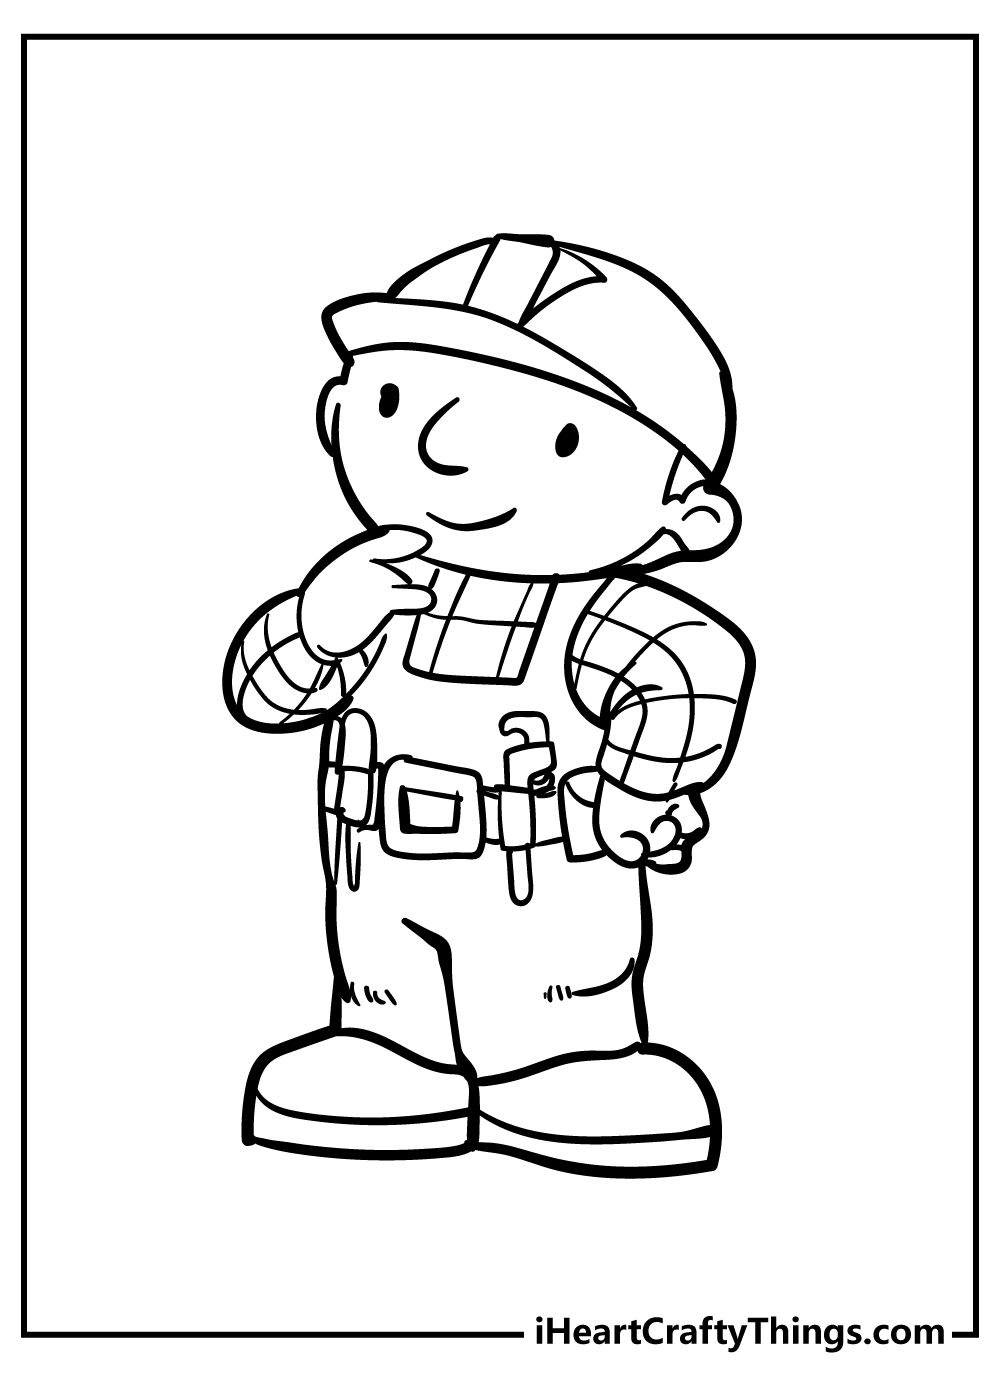 Bob the Builder Coloring Book for kids free printable